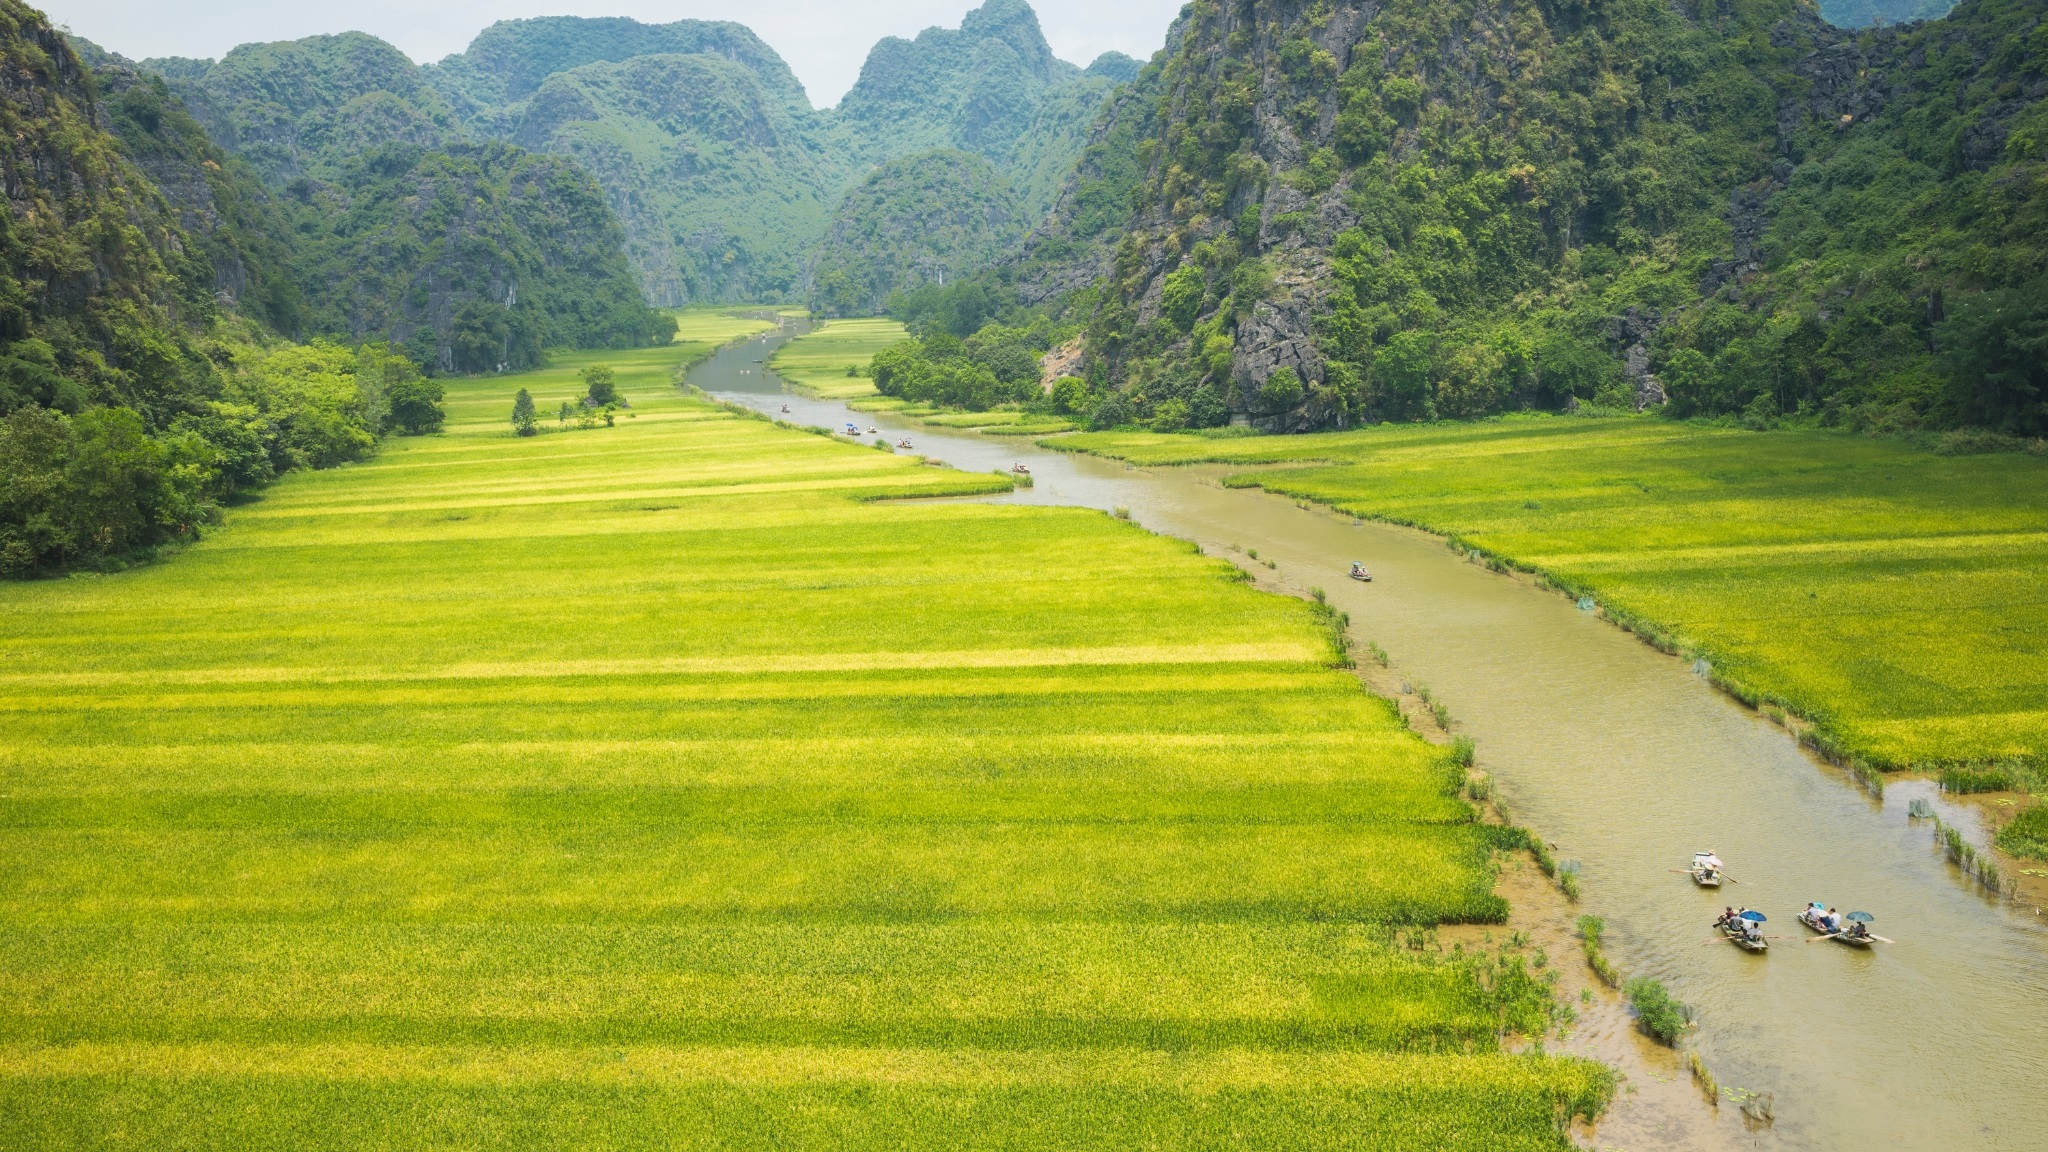 A Full Day Excursion To Tam Coc (Ninh Binh) Within Vietnam And Cambodia 3 Week Trip